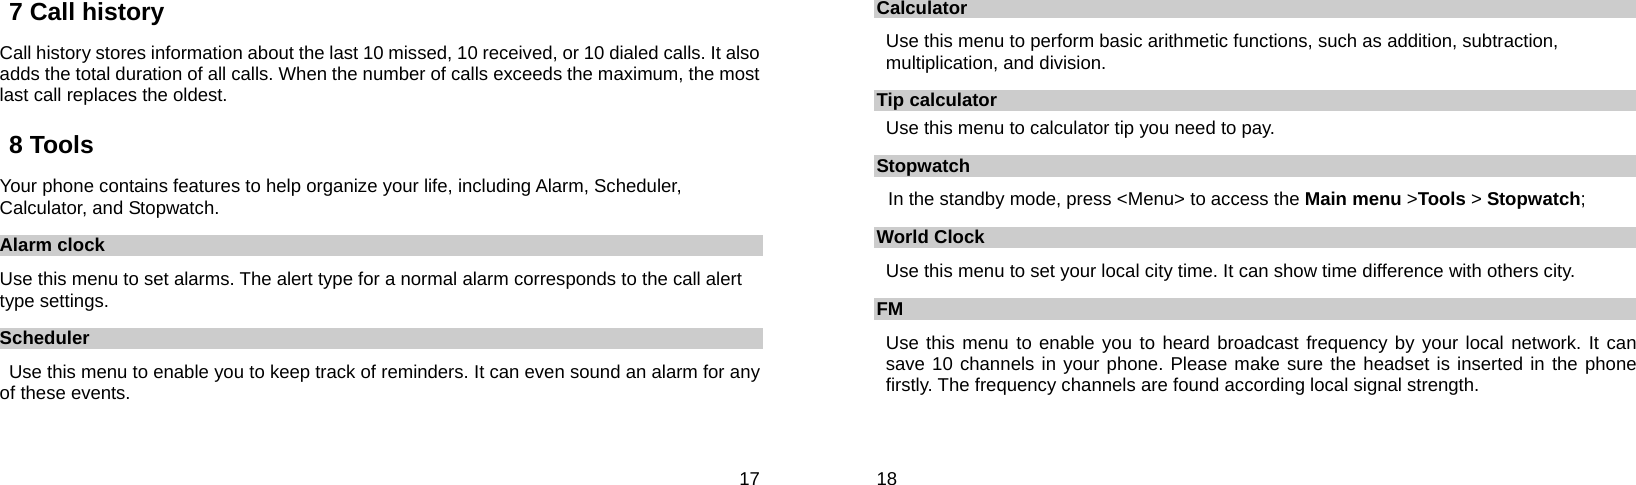  17 7 Call history Call history stores information about the last 10 missed, 10 received, or 10 dialed calls. It also adds the total duration of all calls. When the number of calls exceeds the maximum, the most last call replaces the oldest. 8 Tools Your phone contains features to help organize your life, including Alarm, Scheduler, Calculator, and Stopwatch. Alarm clock Use this menu to set alarms. The alert type for a normal alarm corresponds to the call alert type settings.   Scheduler Use this menu to enable you to keep track of reminders. It can even sound an alarm for any of these events.  18 Calculator Use this menu to perform basic arithmetic functions, such as addition, subtraction, multiplication, and division.     Tip calculator Use this menu to calculator tip you need to pay. Stopwatch In the standby mode, press &lt;Menu&gt; to access the Main menu &gt;Tools &gt; Stopwatch; World Clock Use this menu to set your local city time. It can show time difference with others city. FM Use this menu to enable you to heard broadcast frequency by your local network. It can save 10 channels in your phone. Please make sure the headset is inserted in the phone firstly. The frequency channels are found according local signal strength. 